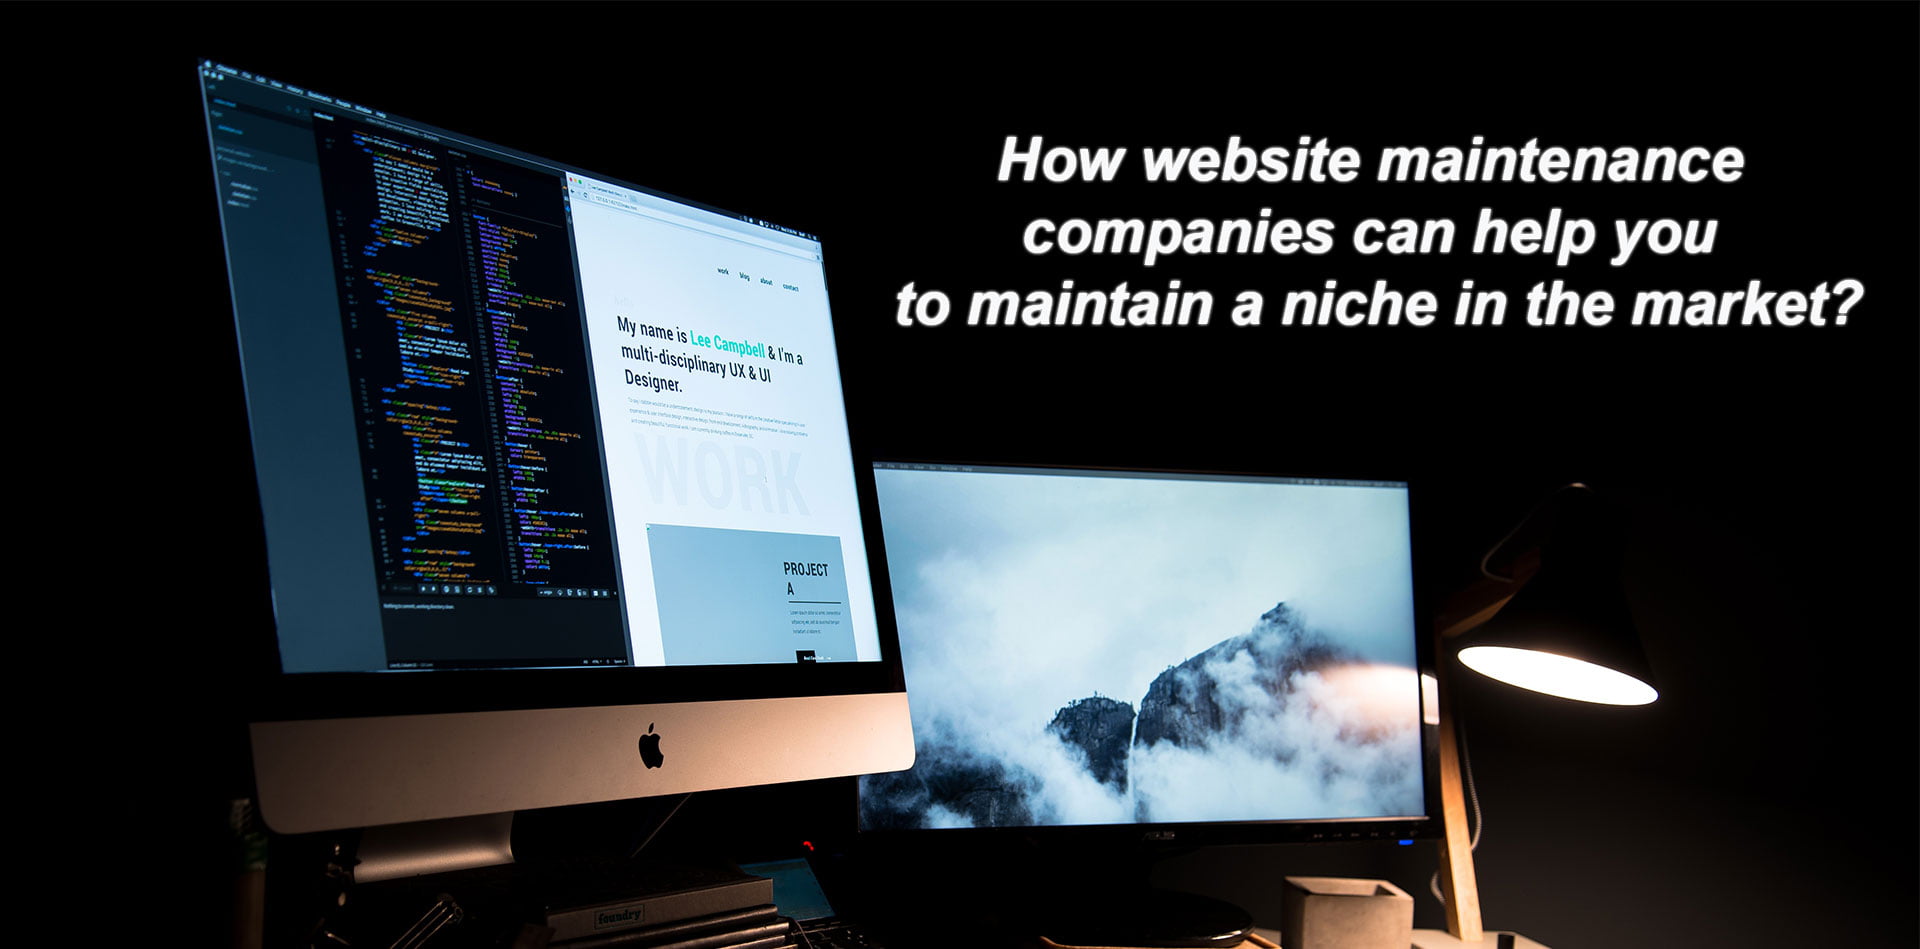 How website maintenance companies can help you to maintain a niche in the market?